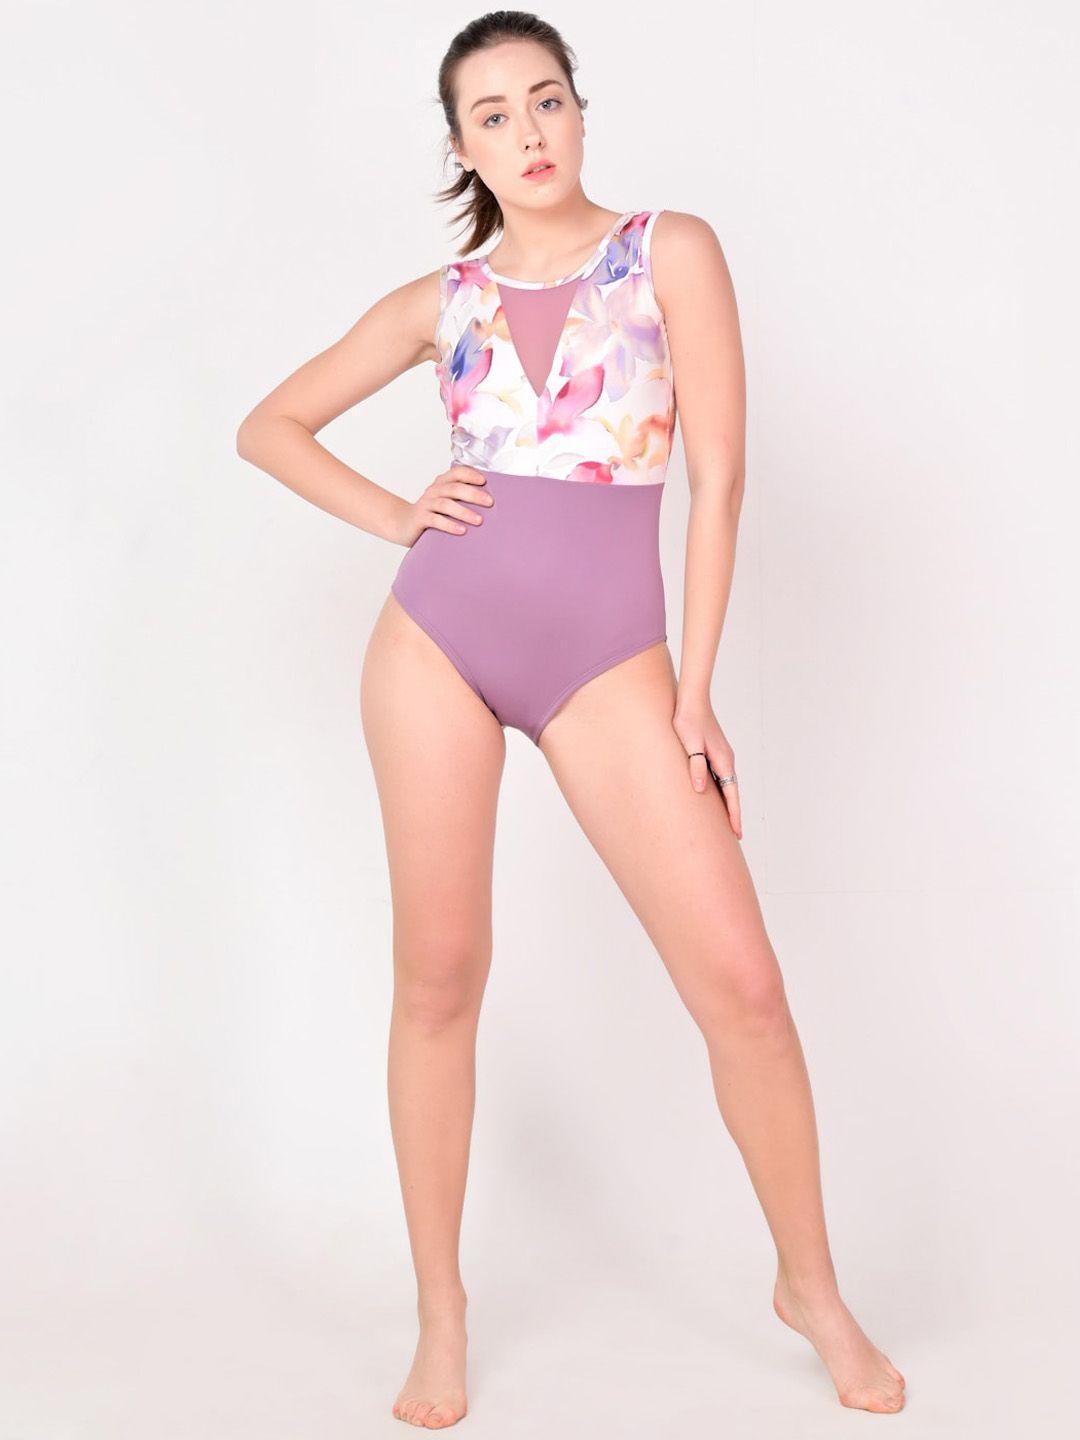 the dance bible printed stretchable bodysuit